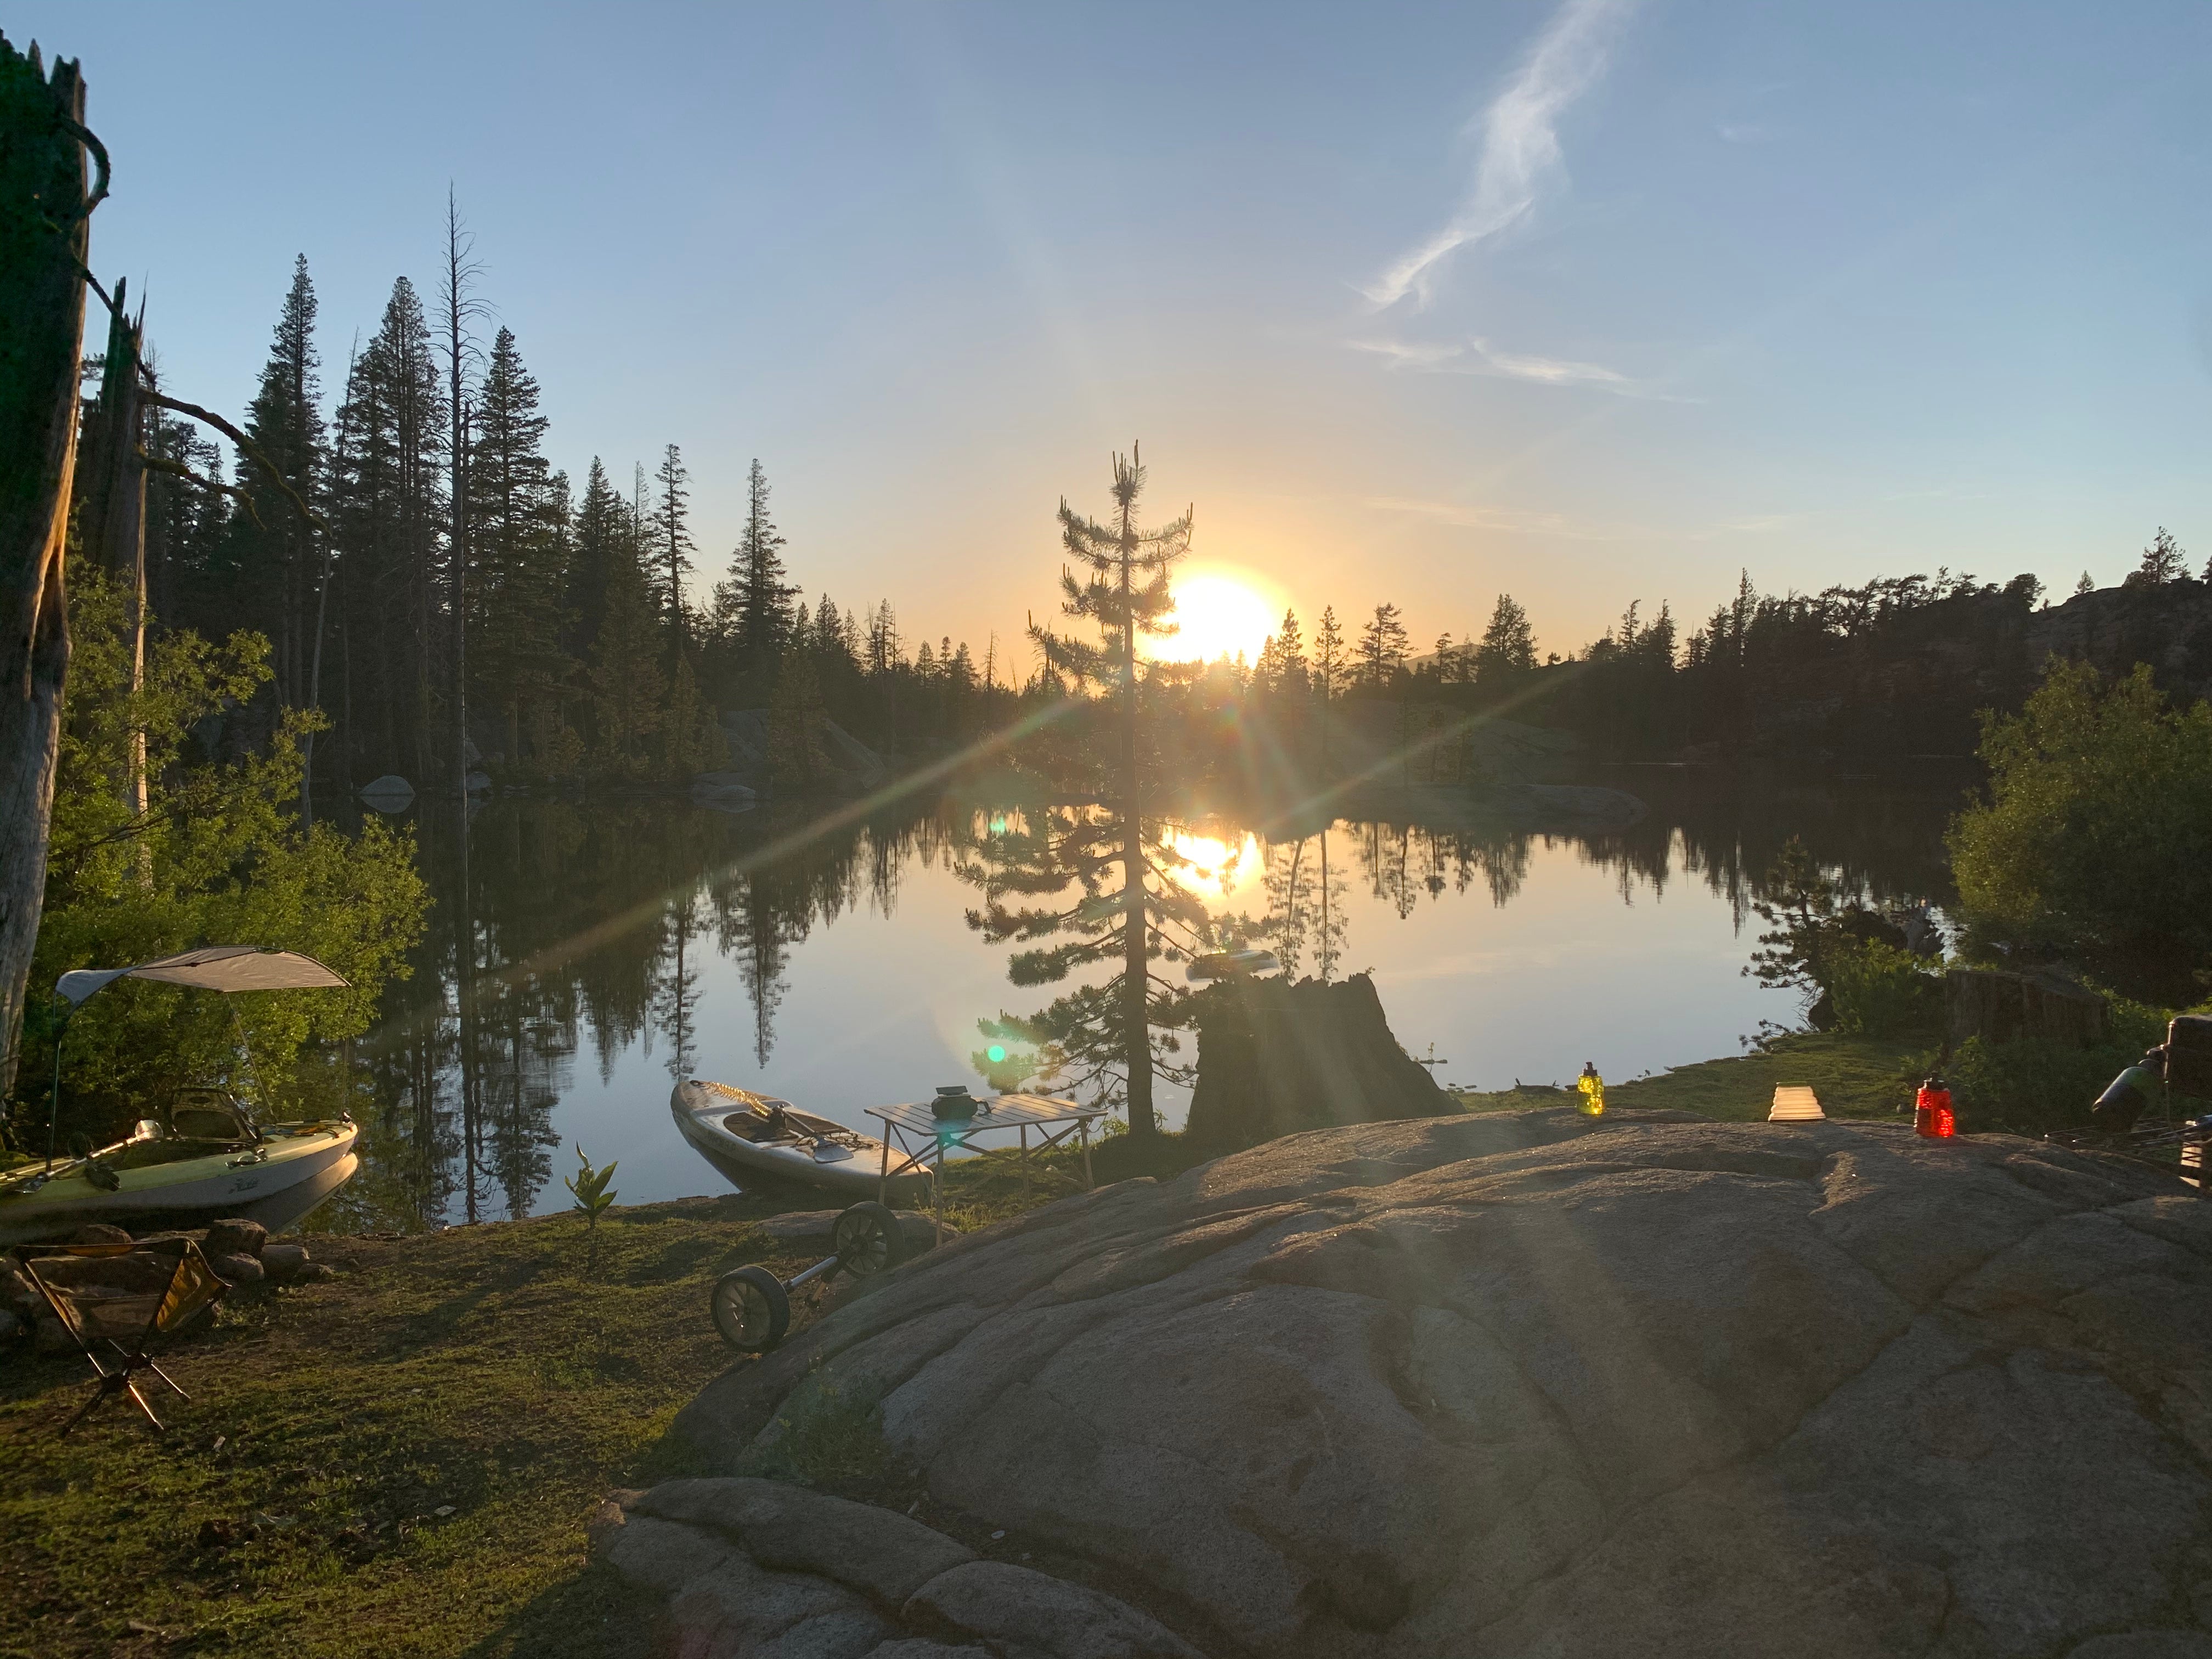 Camper submitted image from Wet Meadows Reservoir - 1